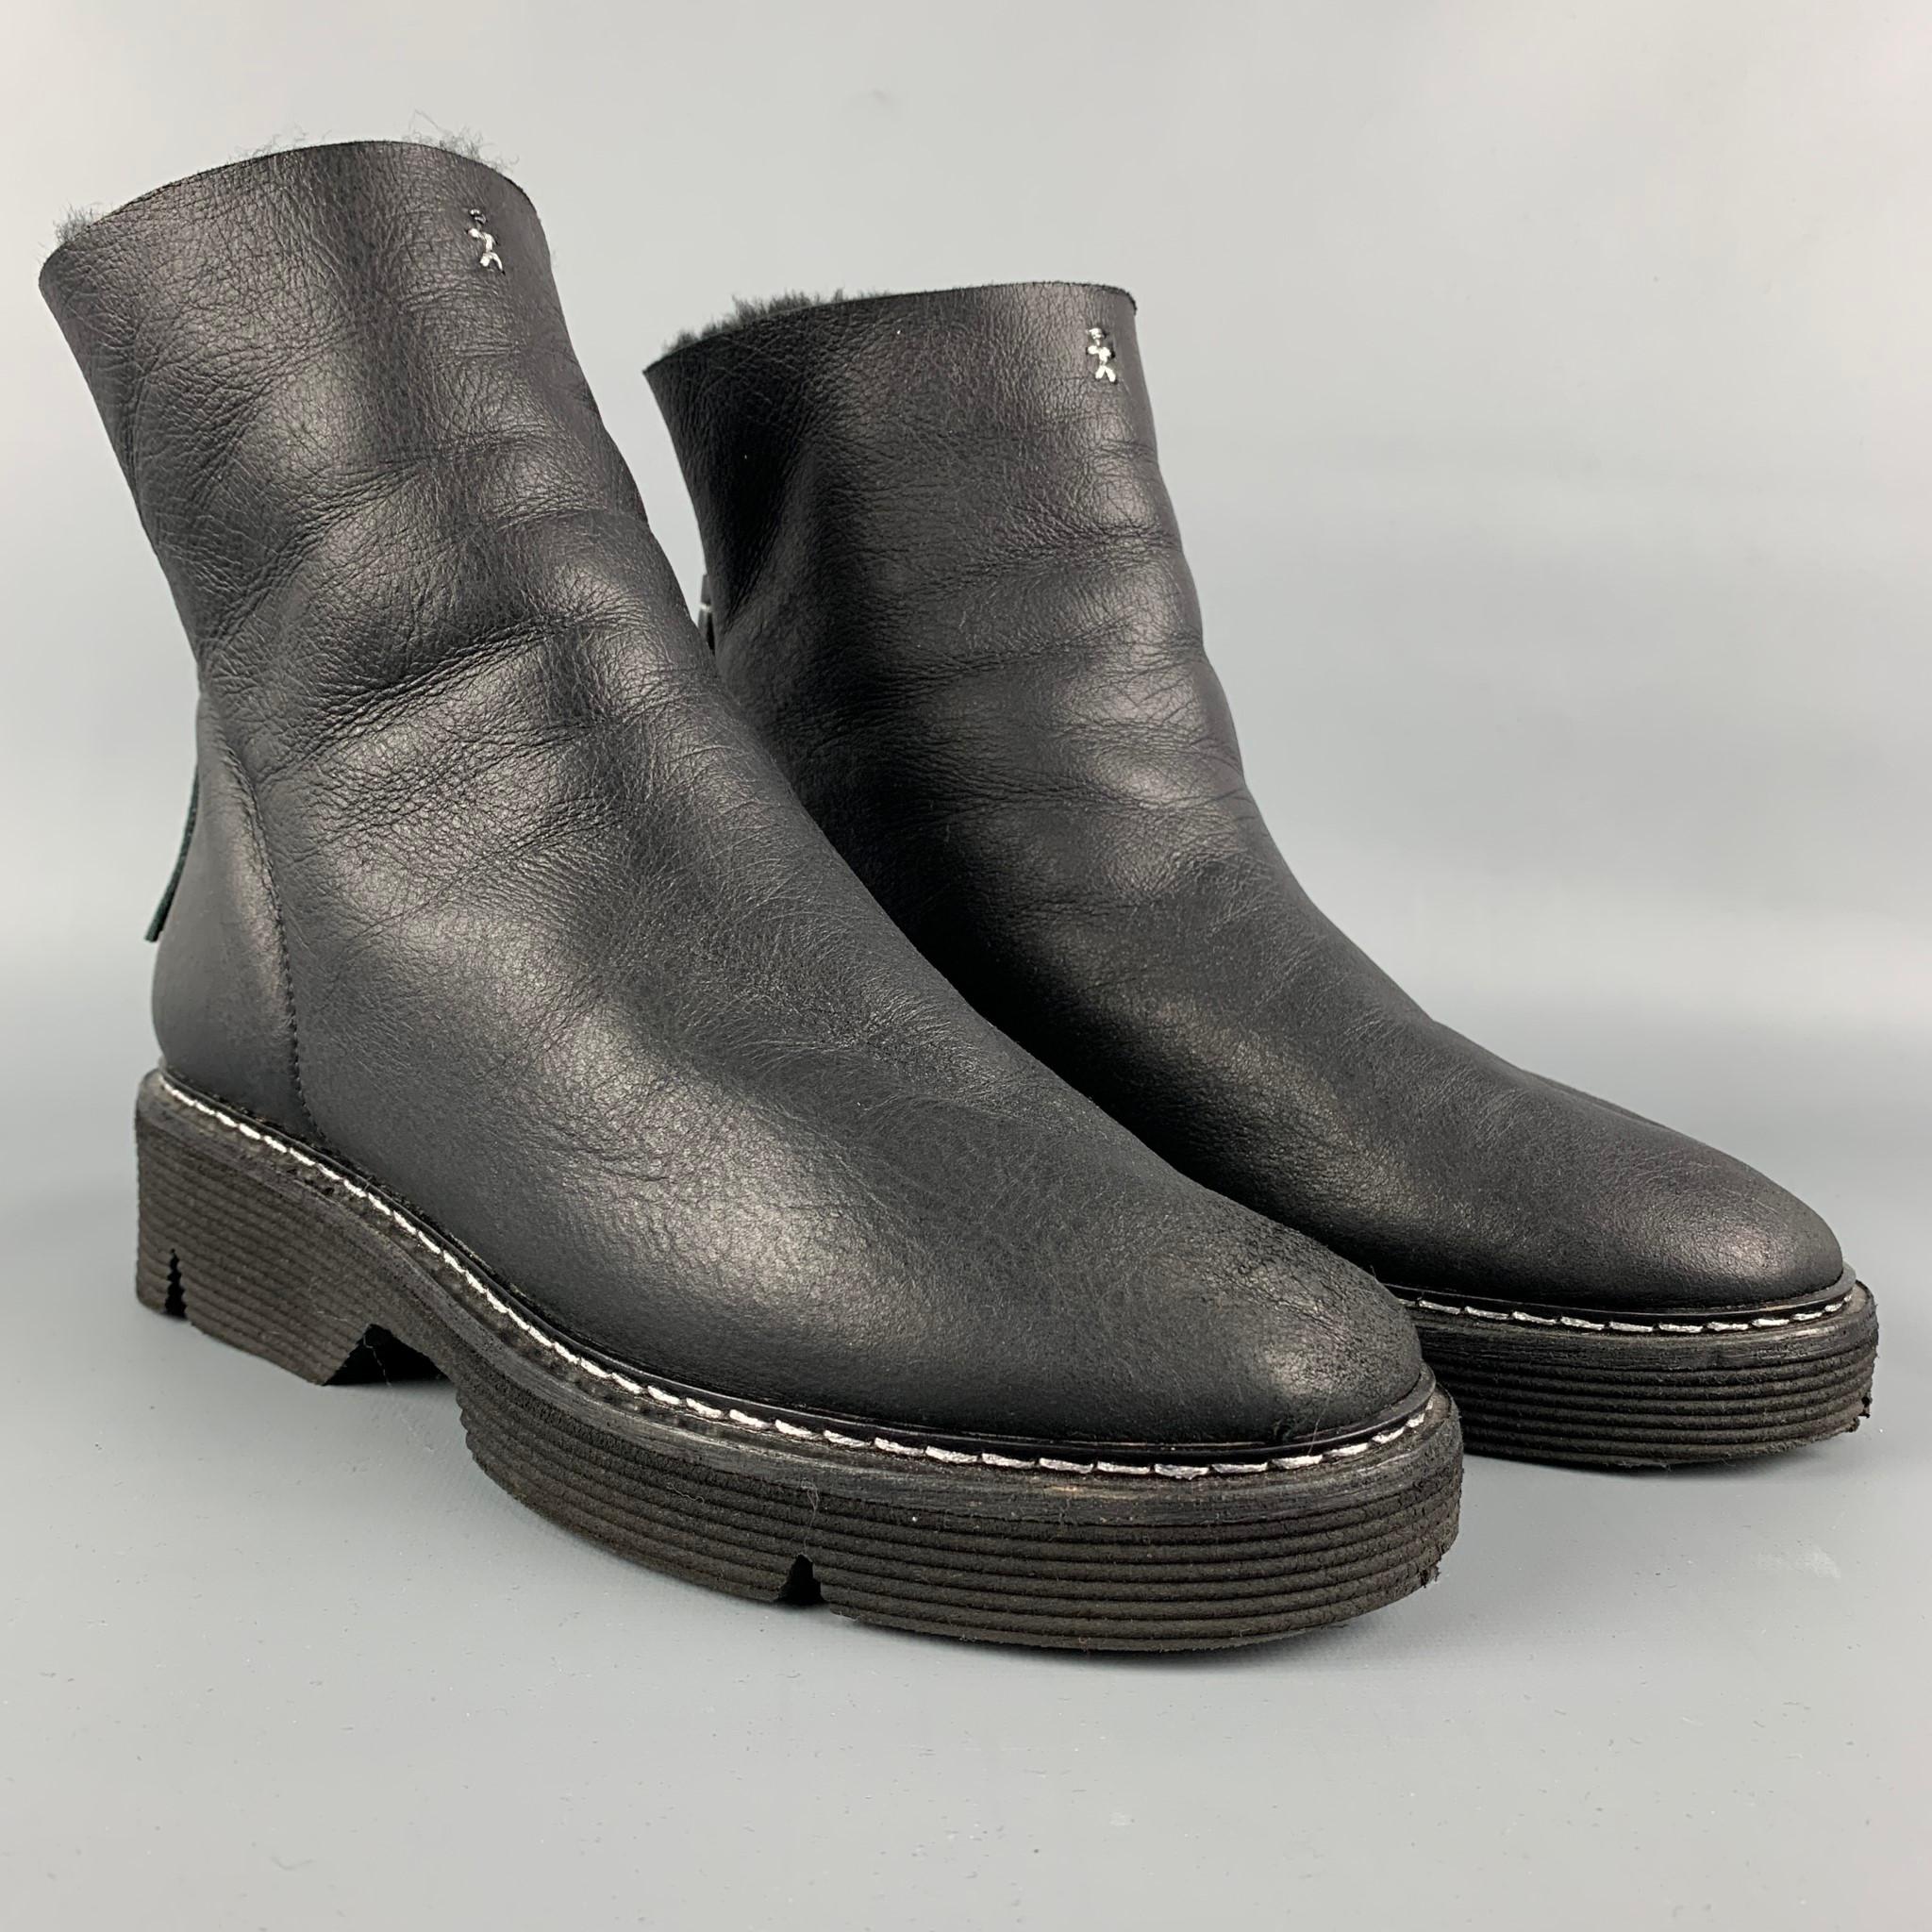 HENRY BEGUELIN ankle boots comes in a black shearling featuring stitching details, rubber sole, and a back zipper closure. 

Very Good Pre-Owned Condition.
Marked: 37

Measurements:

Length: 10 in.
Width: 3.5 in.
Height: 5.5 in. 